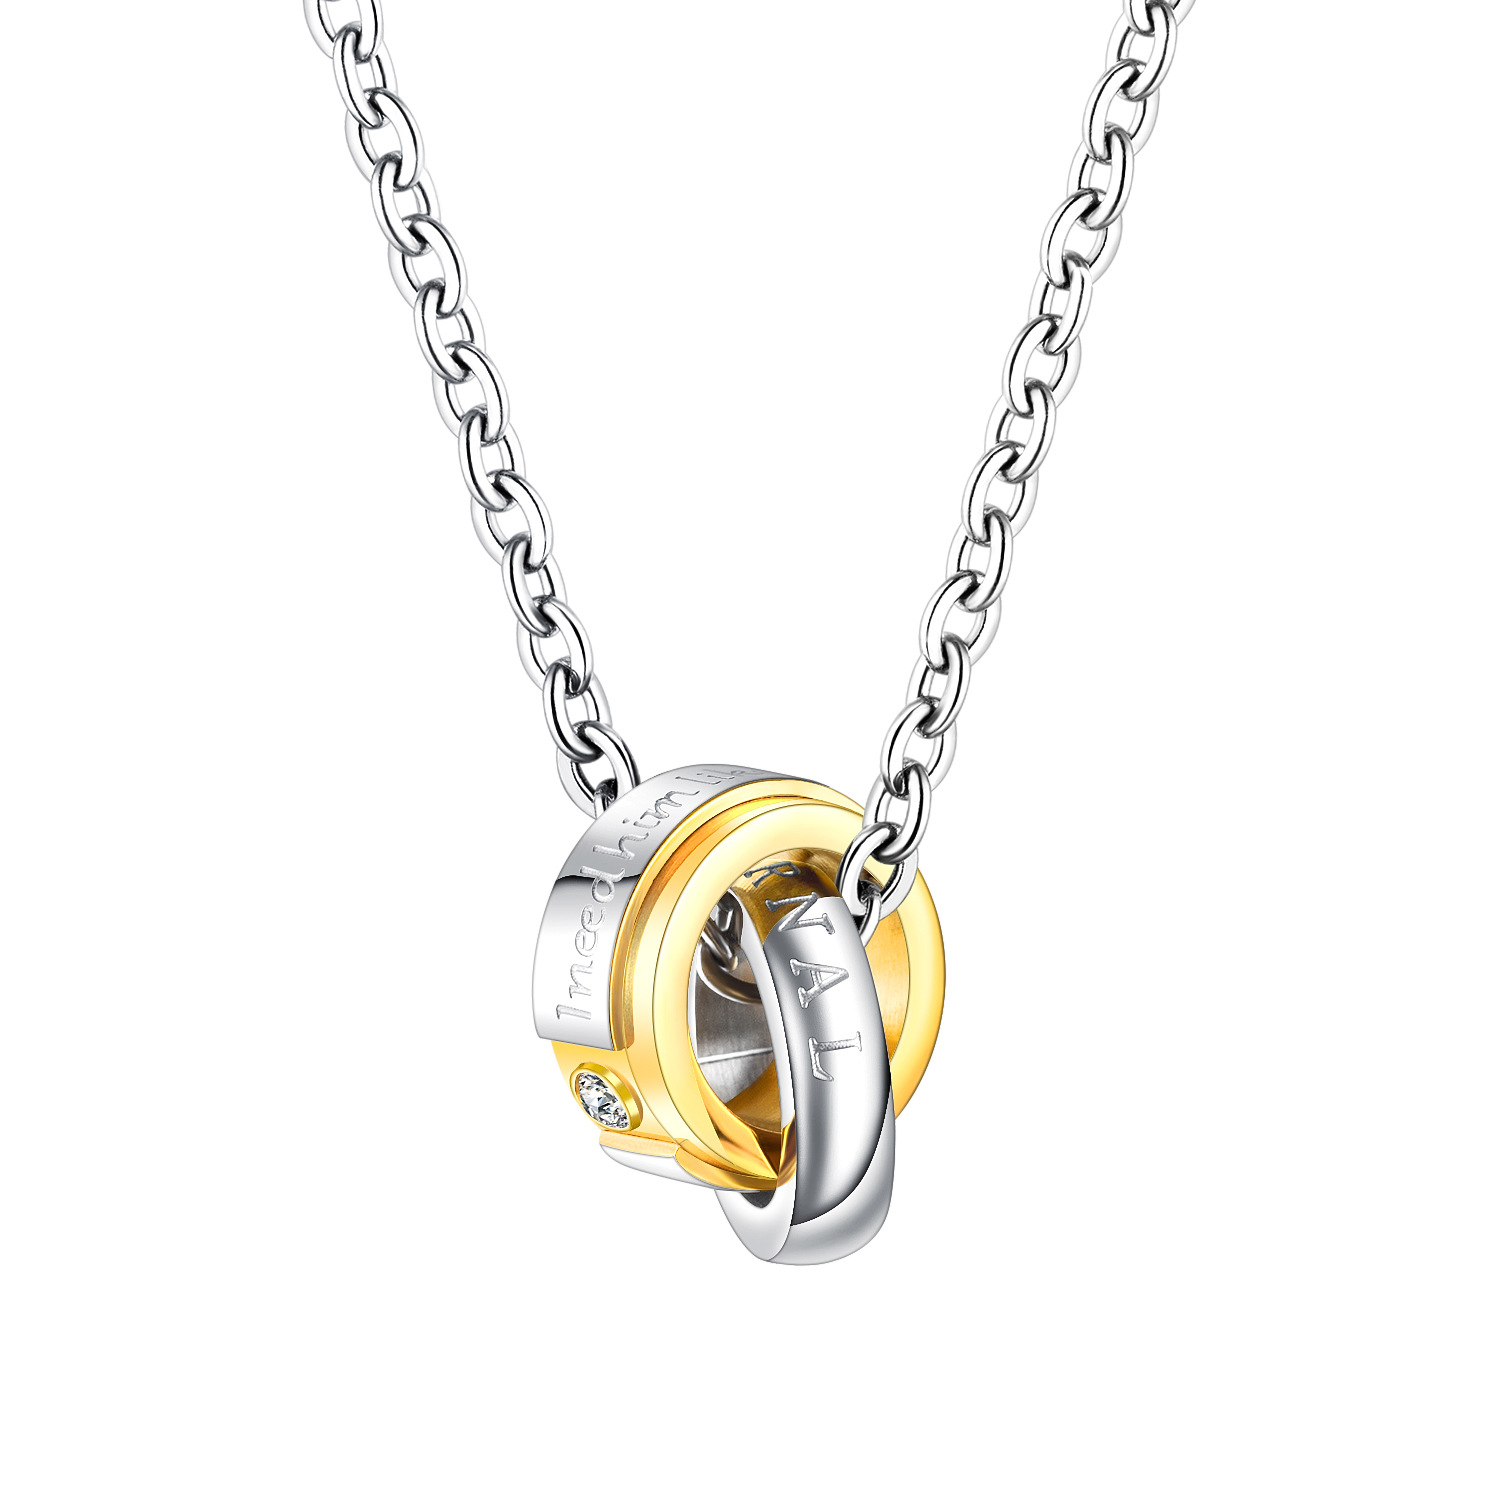 Golden women's pendant + matching chain (with GL62